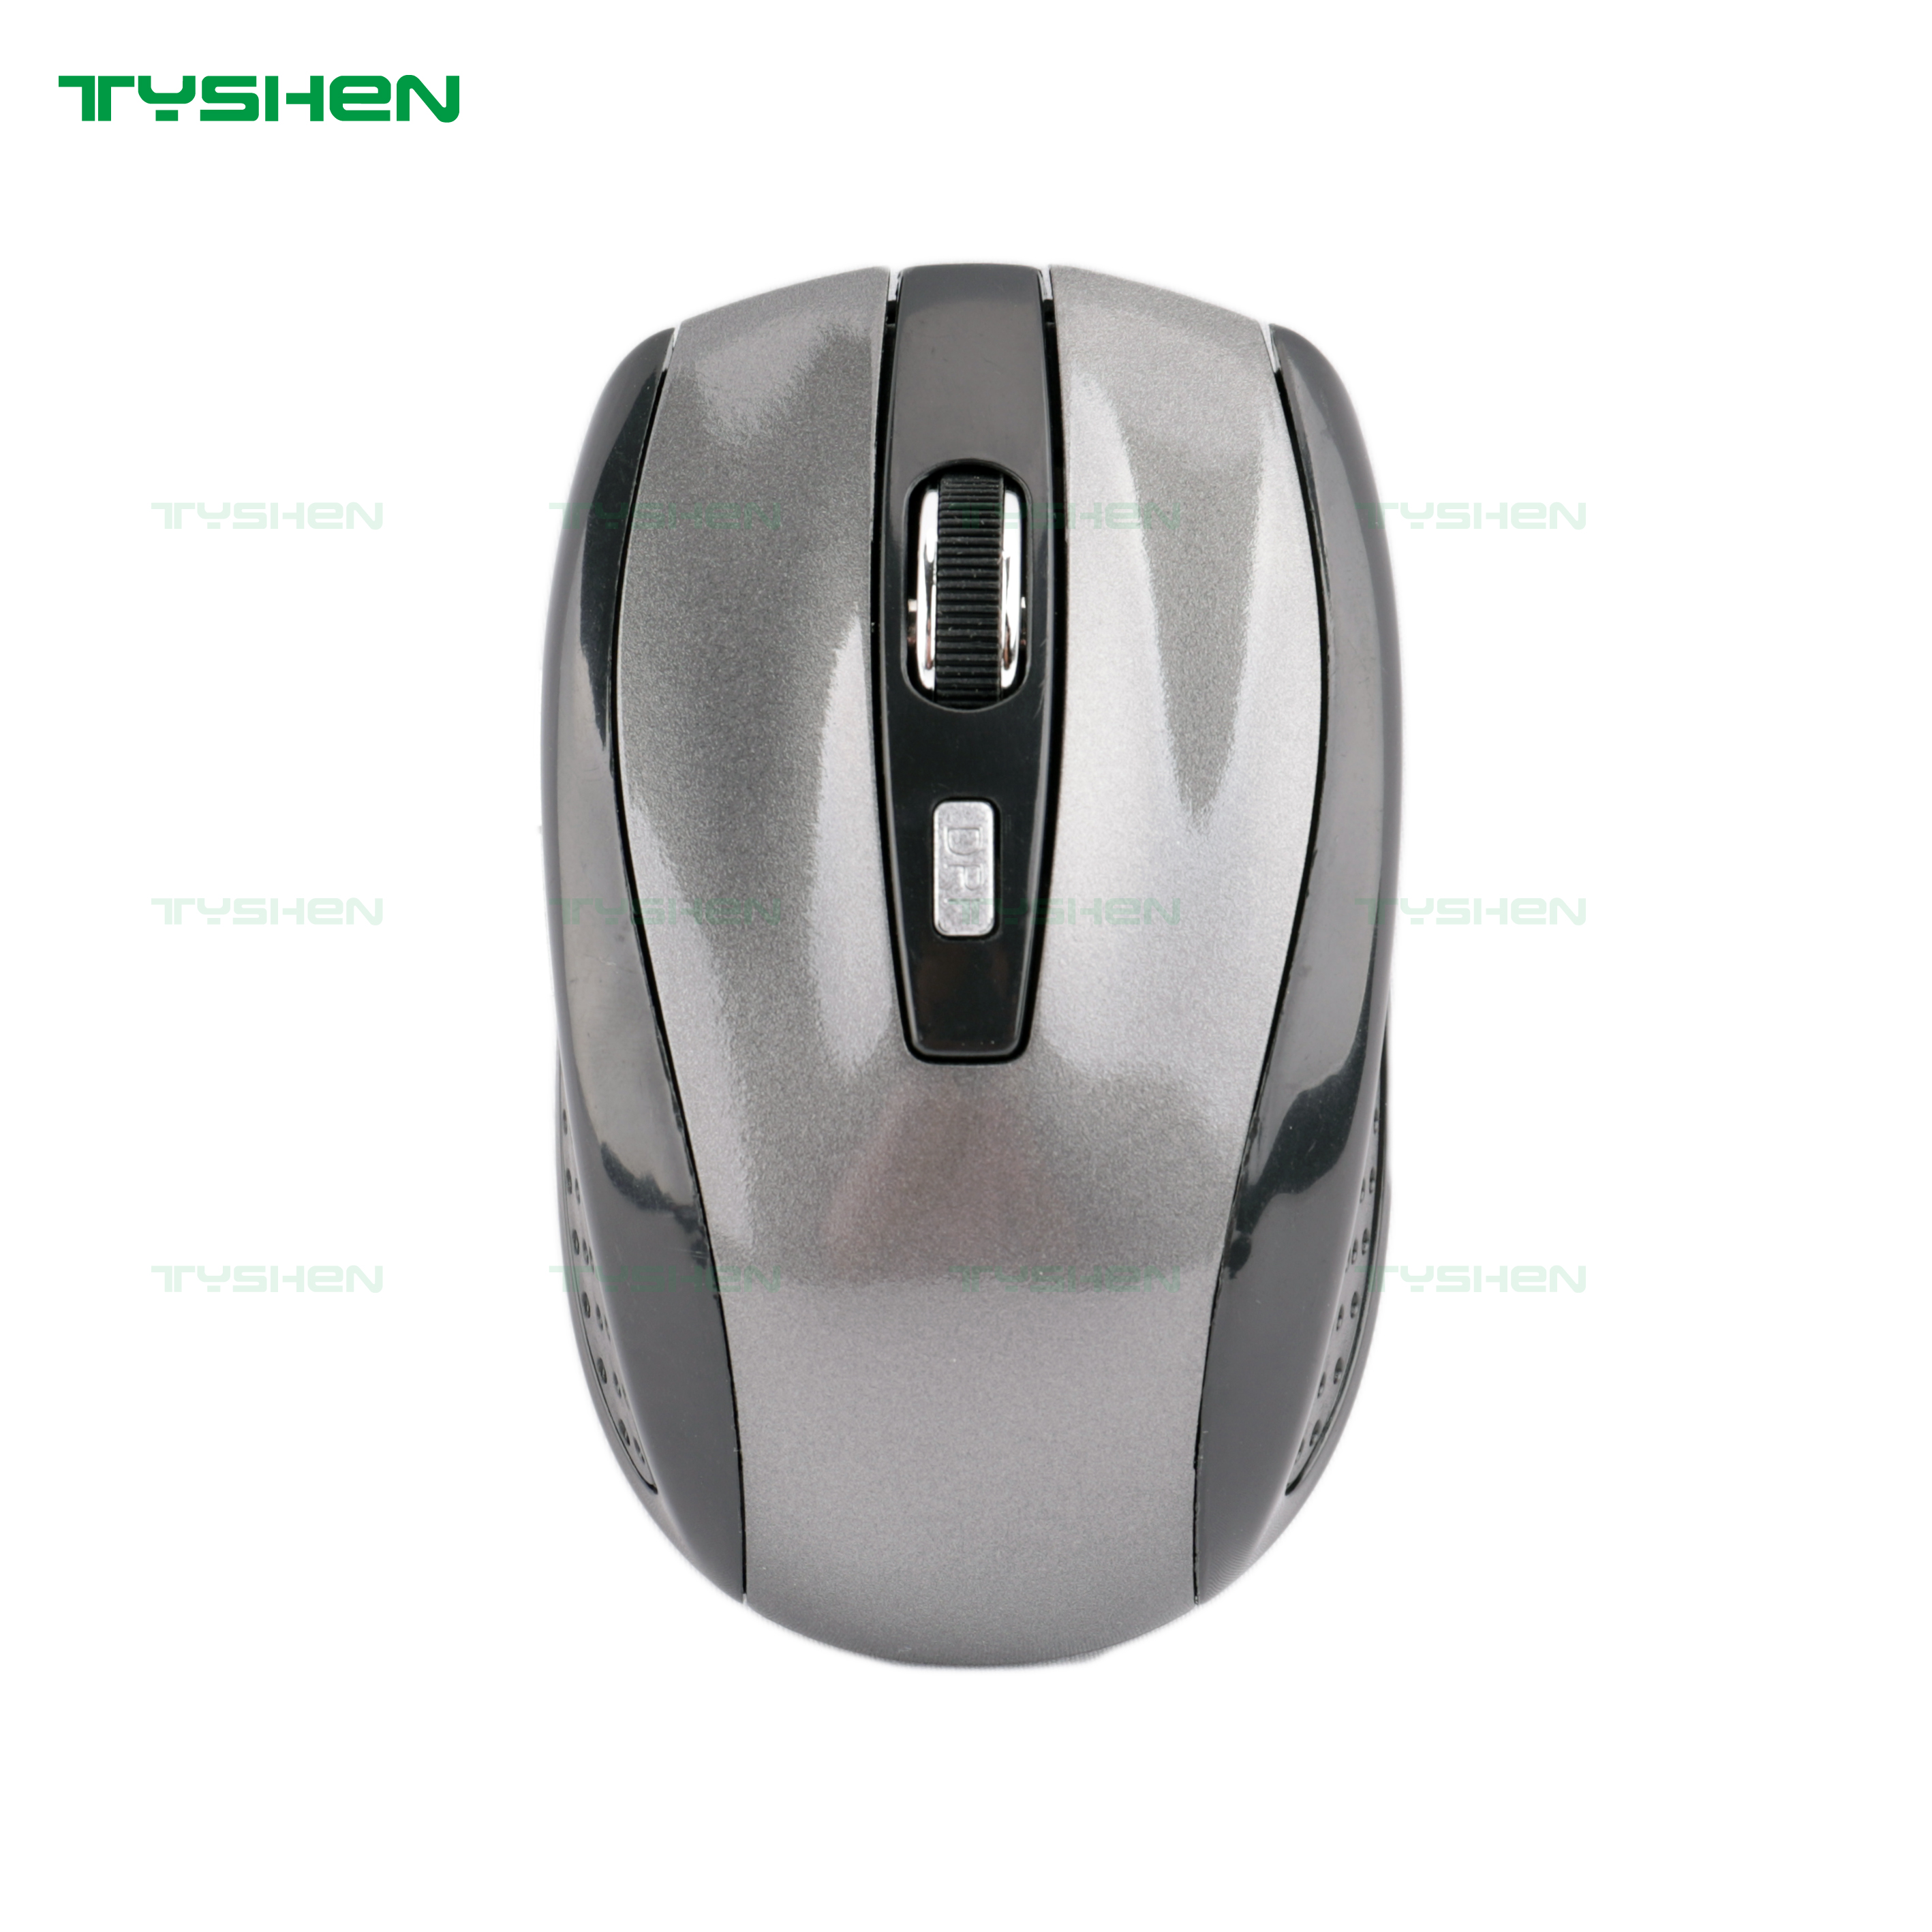 Hot Sale Wireless Mouse,6 Buttons,800/1200/1600 DPI, Various Color Available,Low MOQ 100 Pcs Accepted